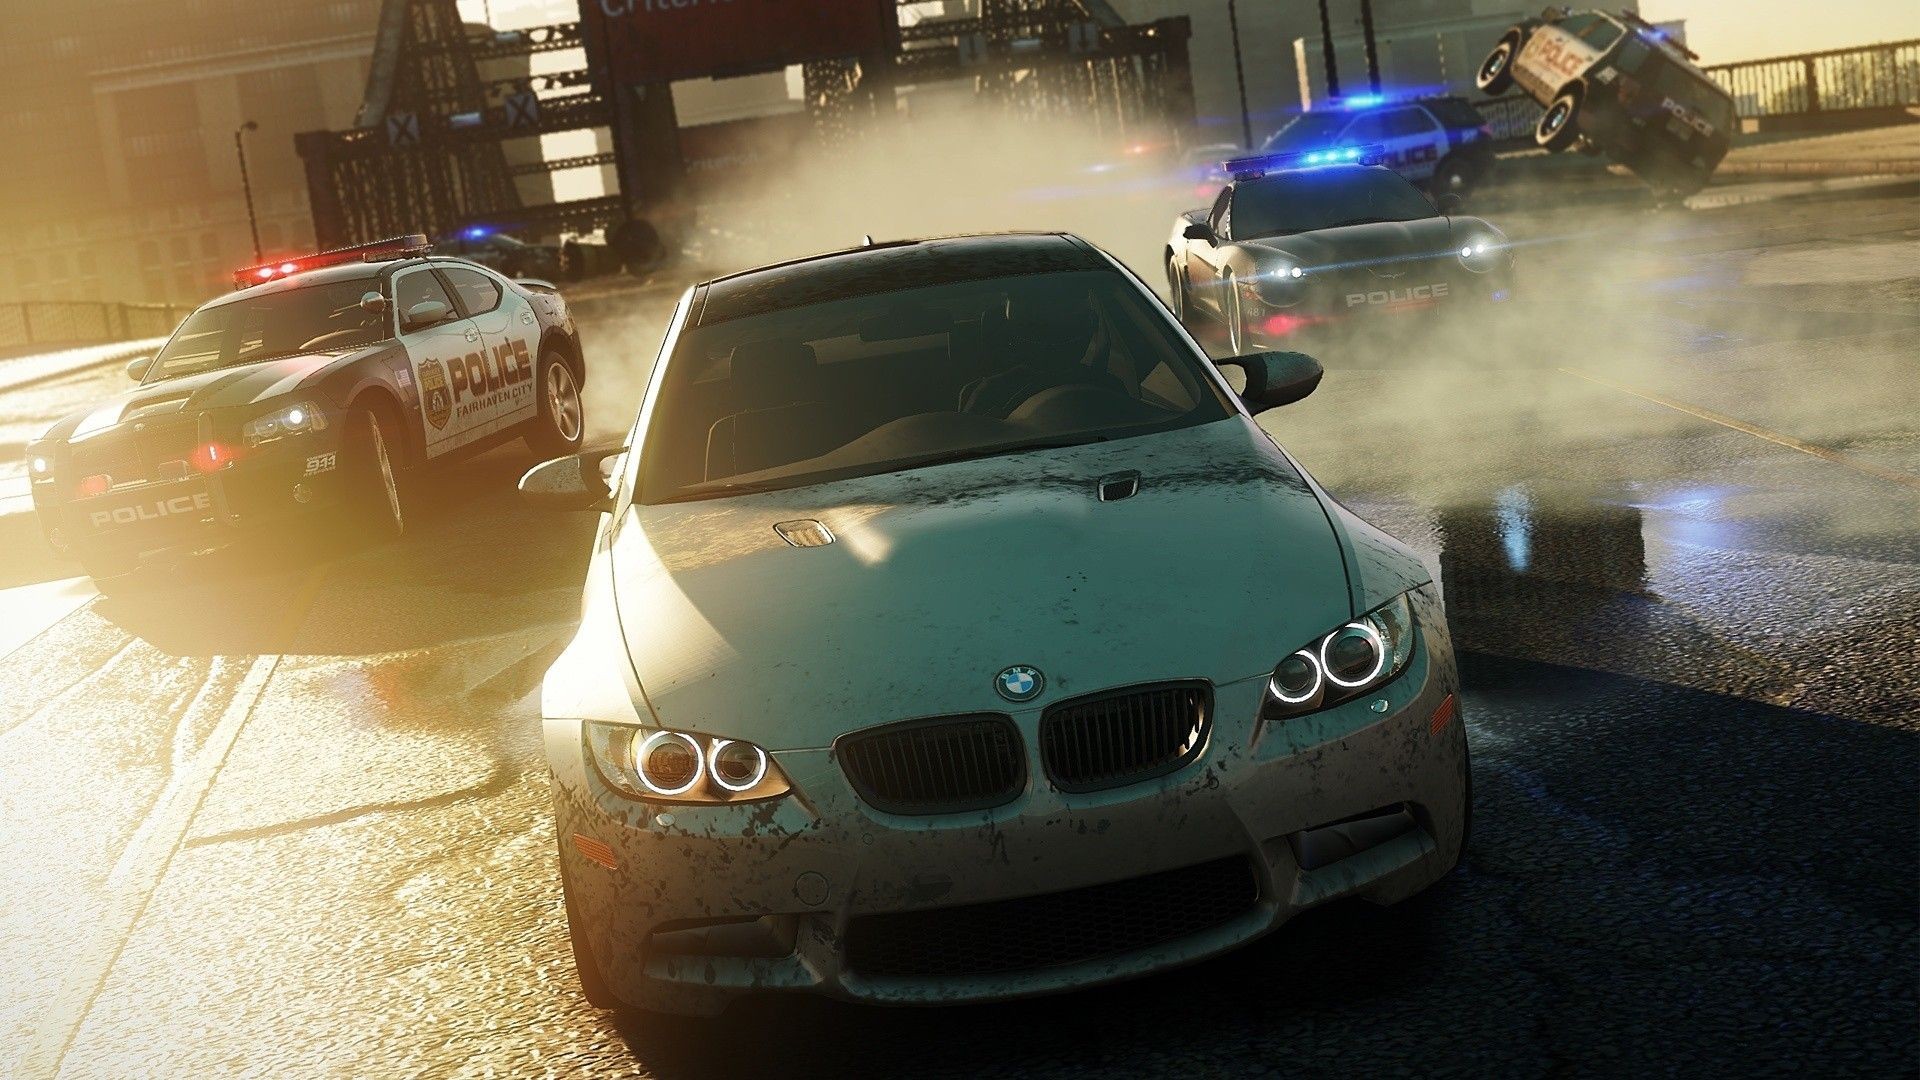 Free photo Need for Speed Most Wanted 2012 on a bmw.